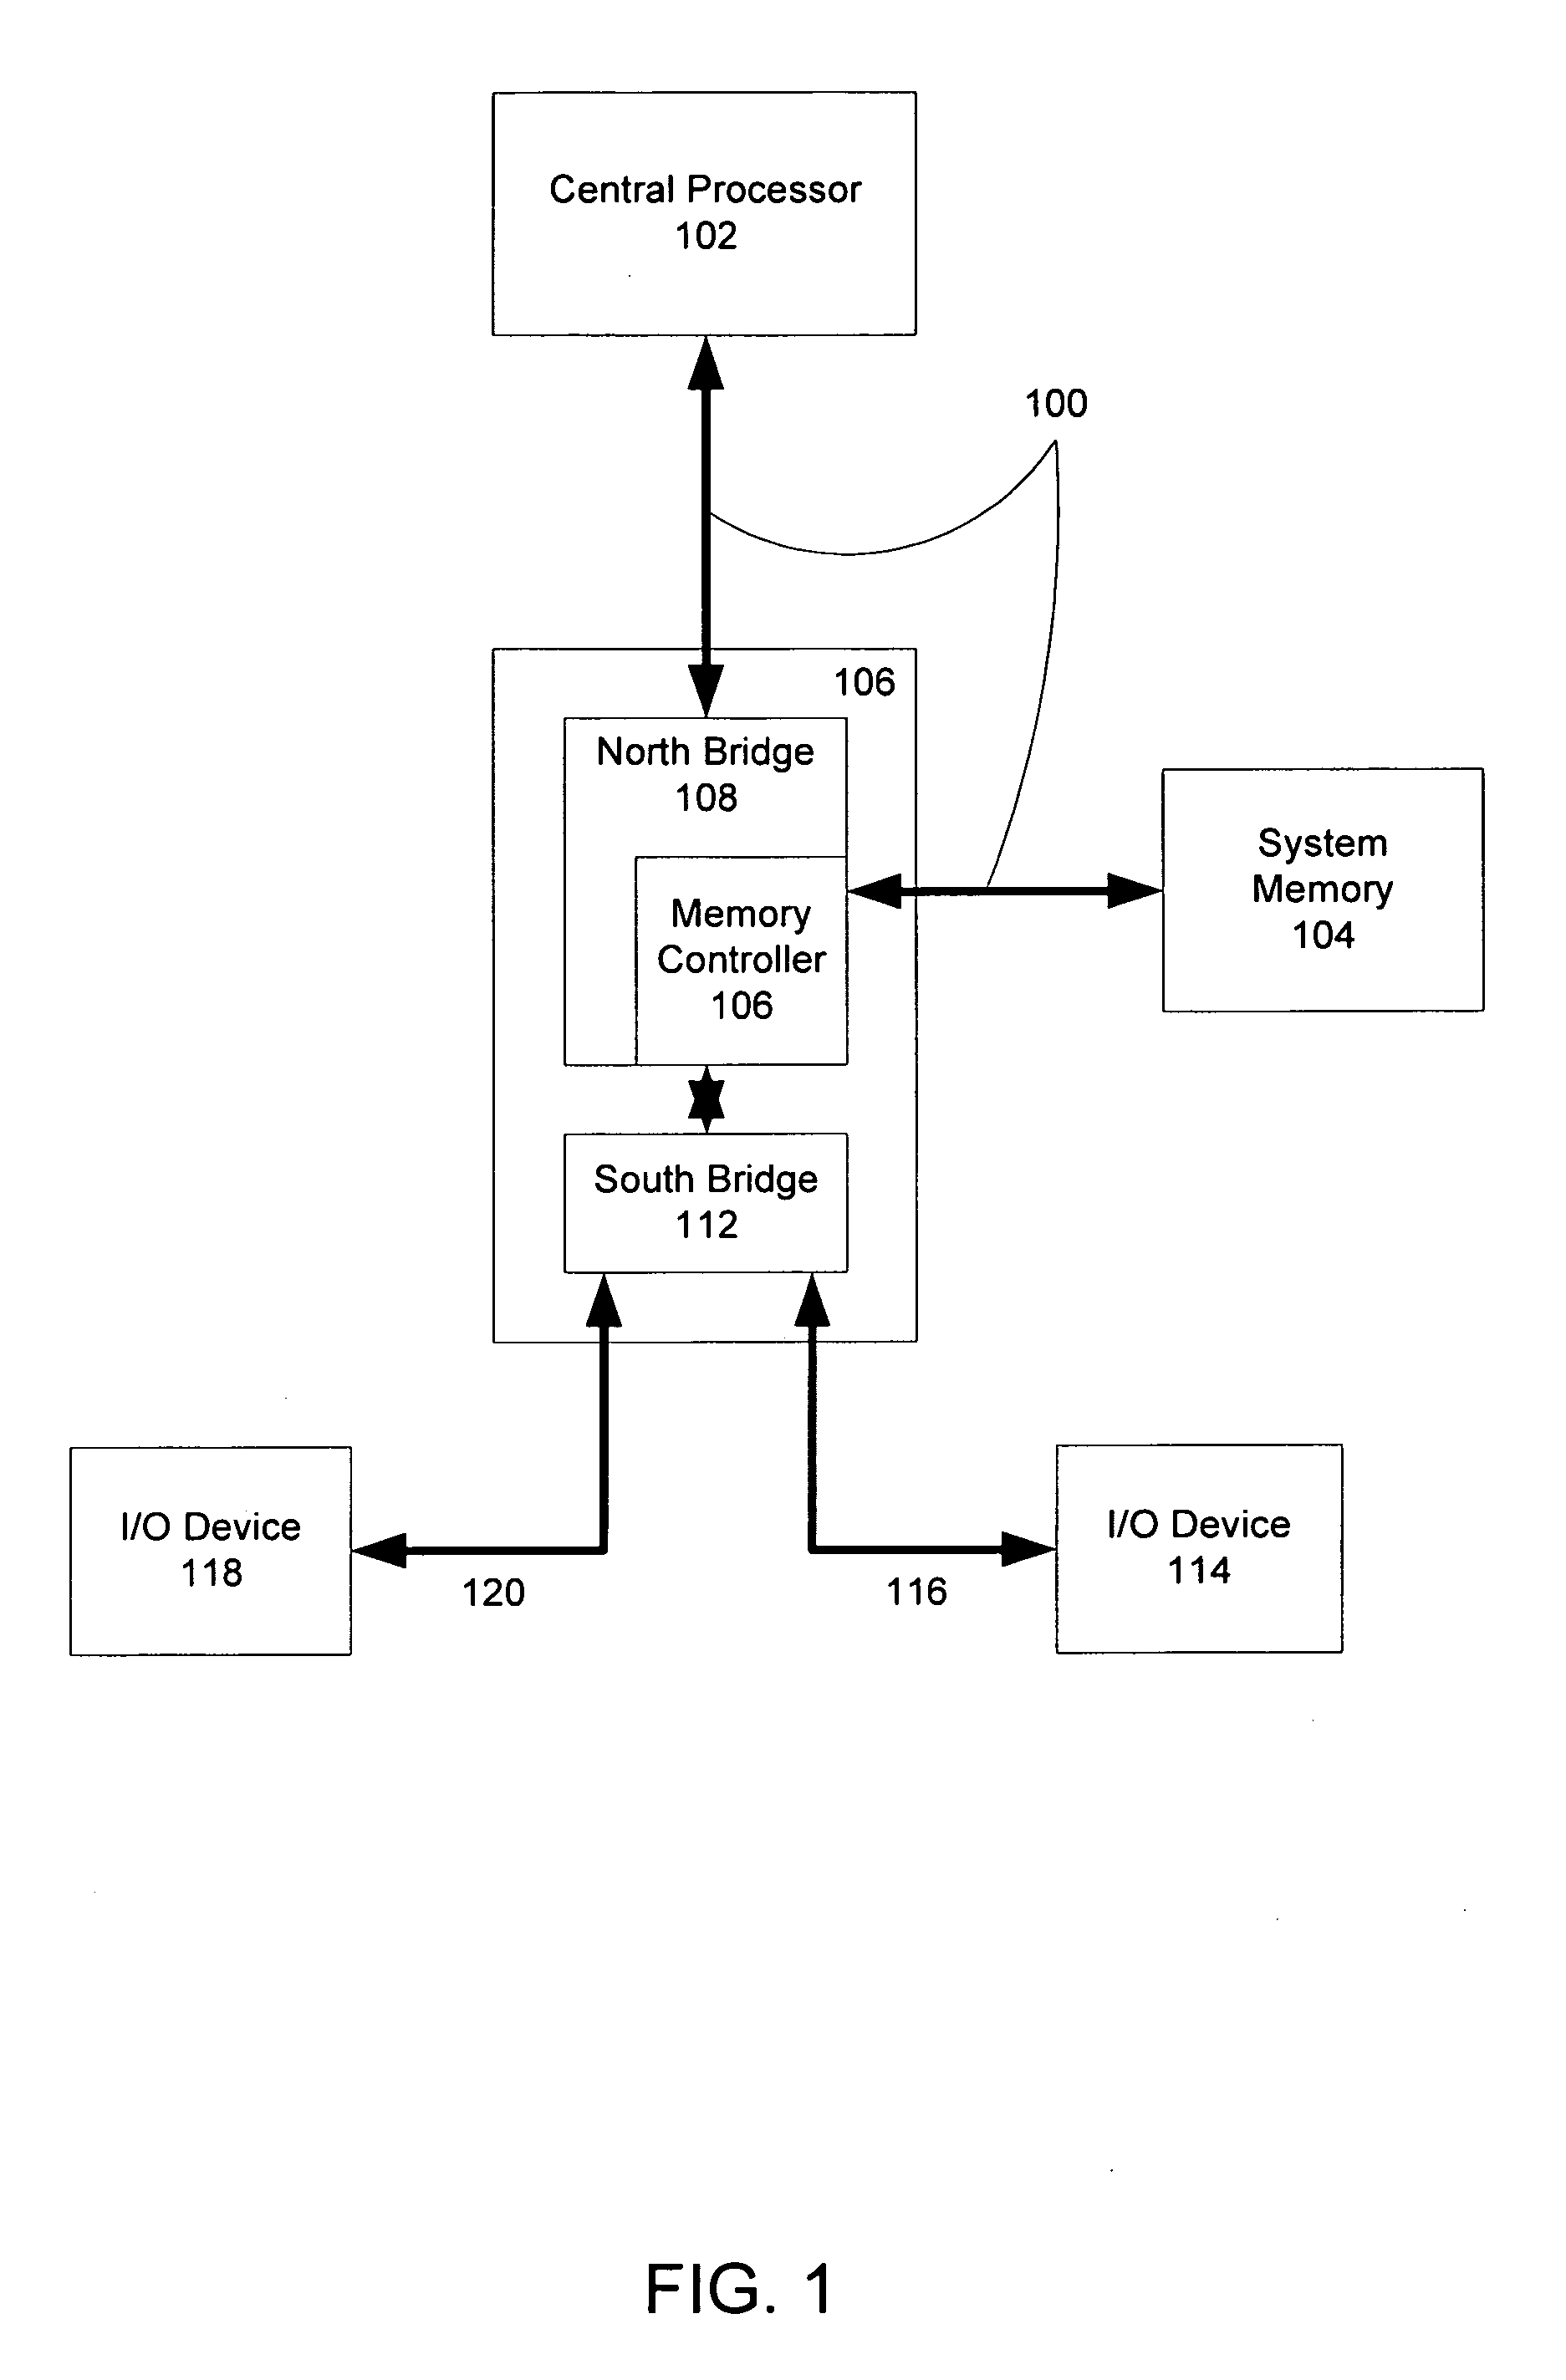 Memory power management through high-speed intra-memory data transfer and dynamic memory address remapping